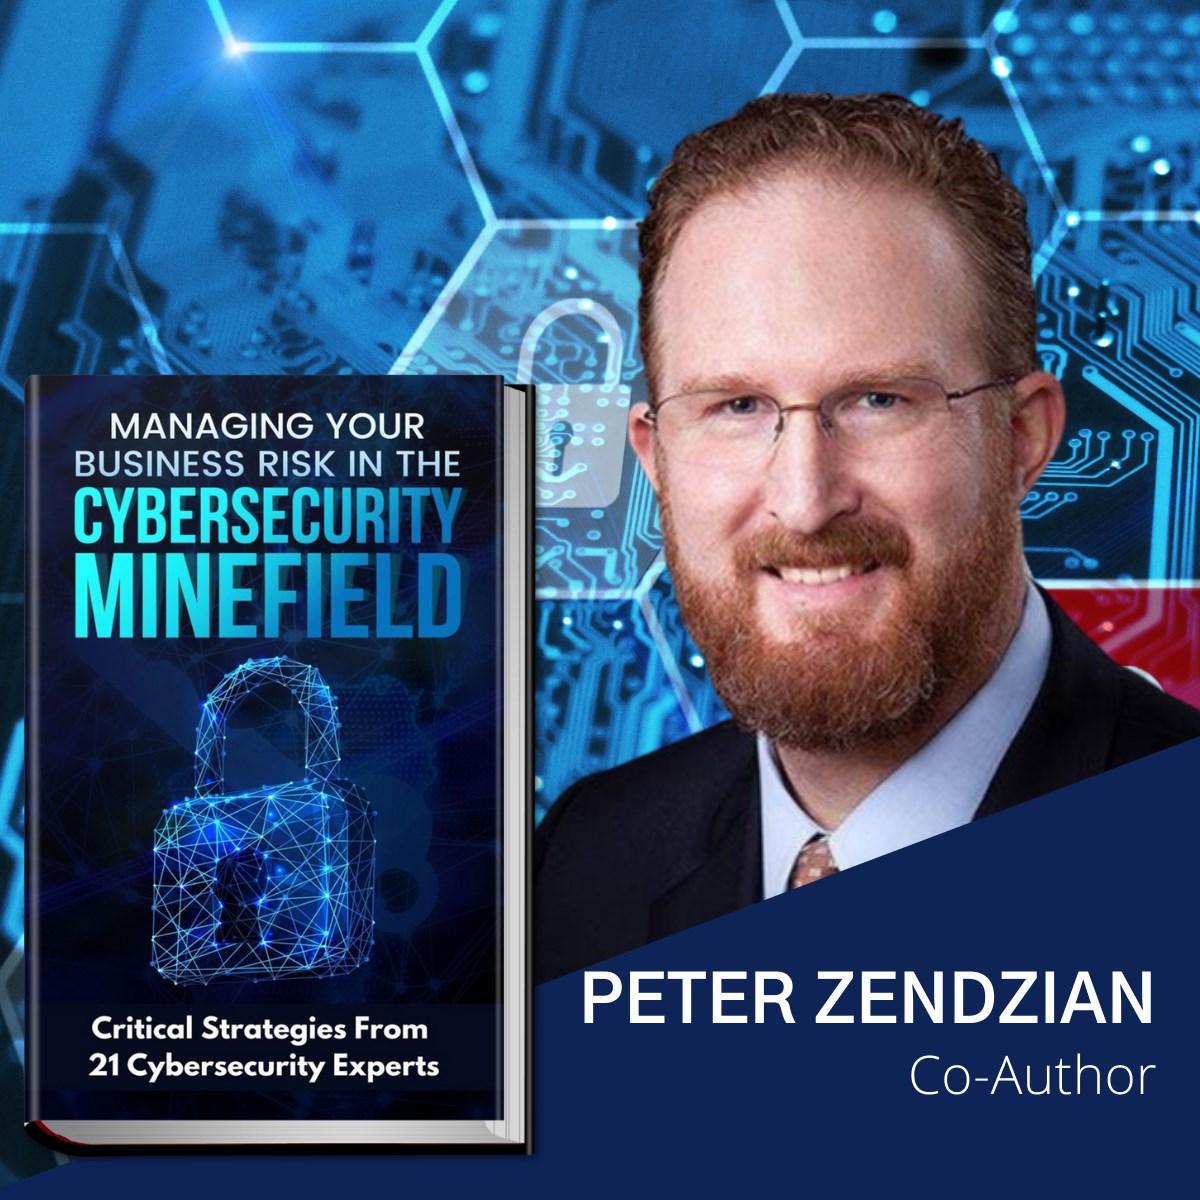 Did you hear the book our CEO Peter R Zendzian co-authored was named a best-seller in 3 categories on Amazon?